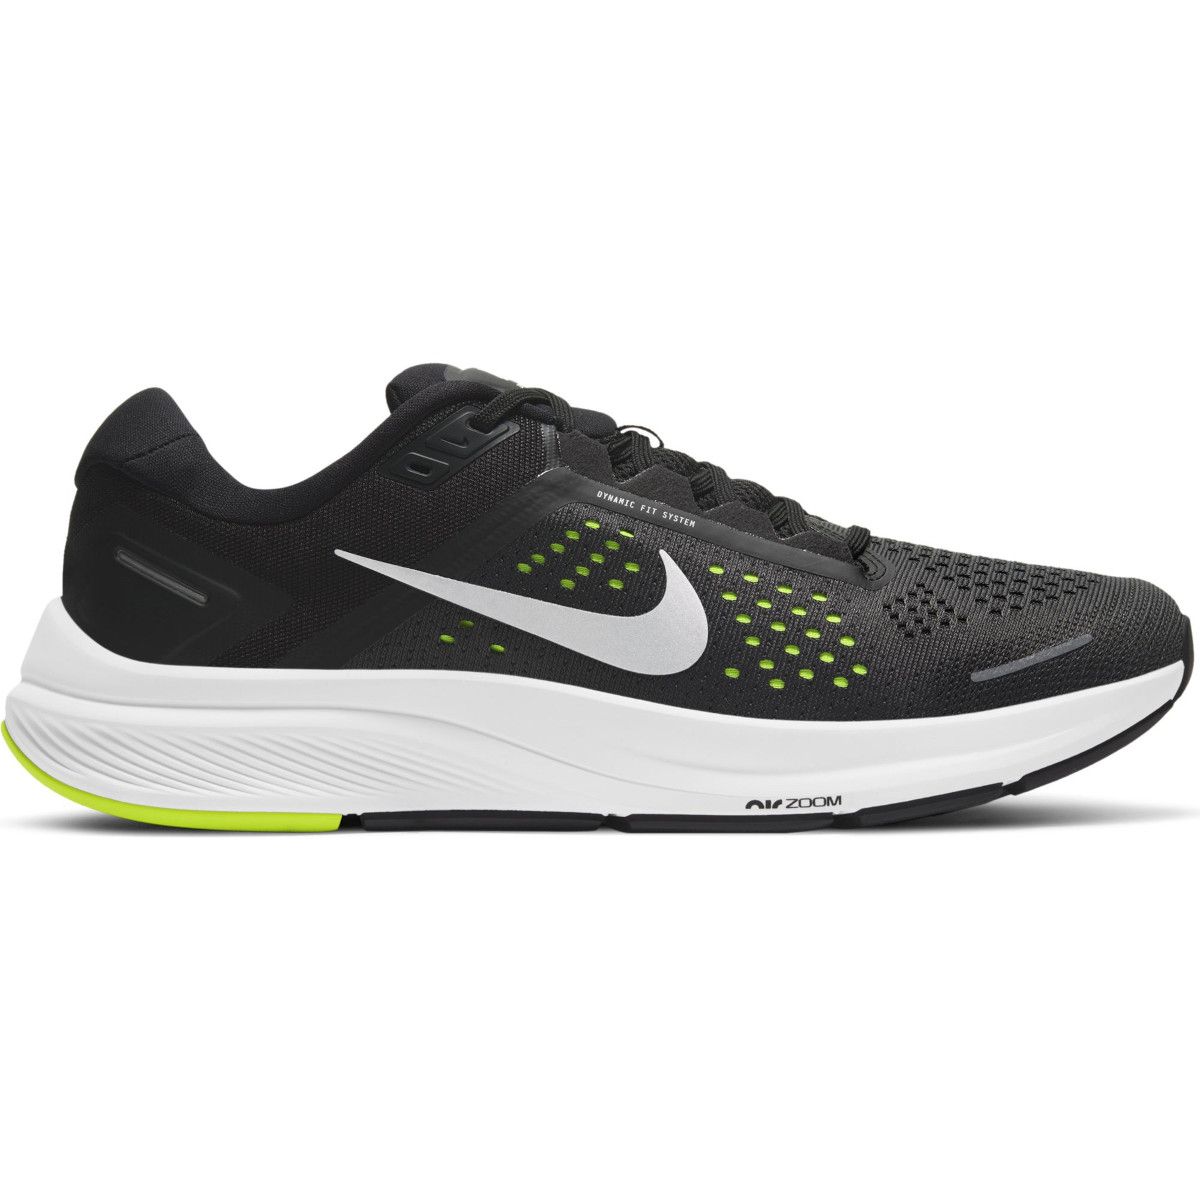 Nike Air Zoom Structure 23 Men's Running Shoes CZ6720-010